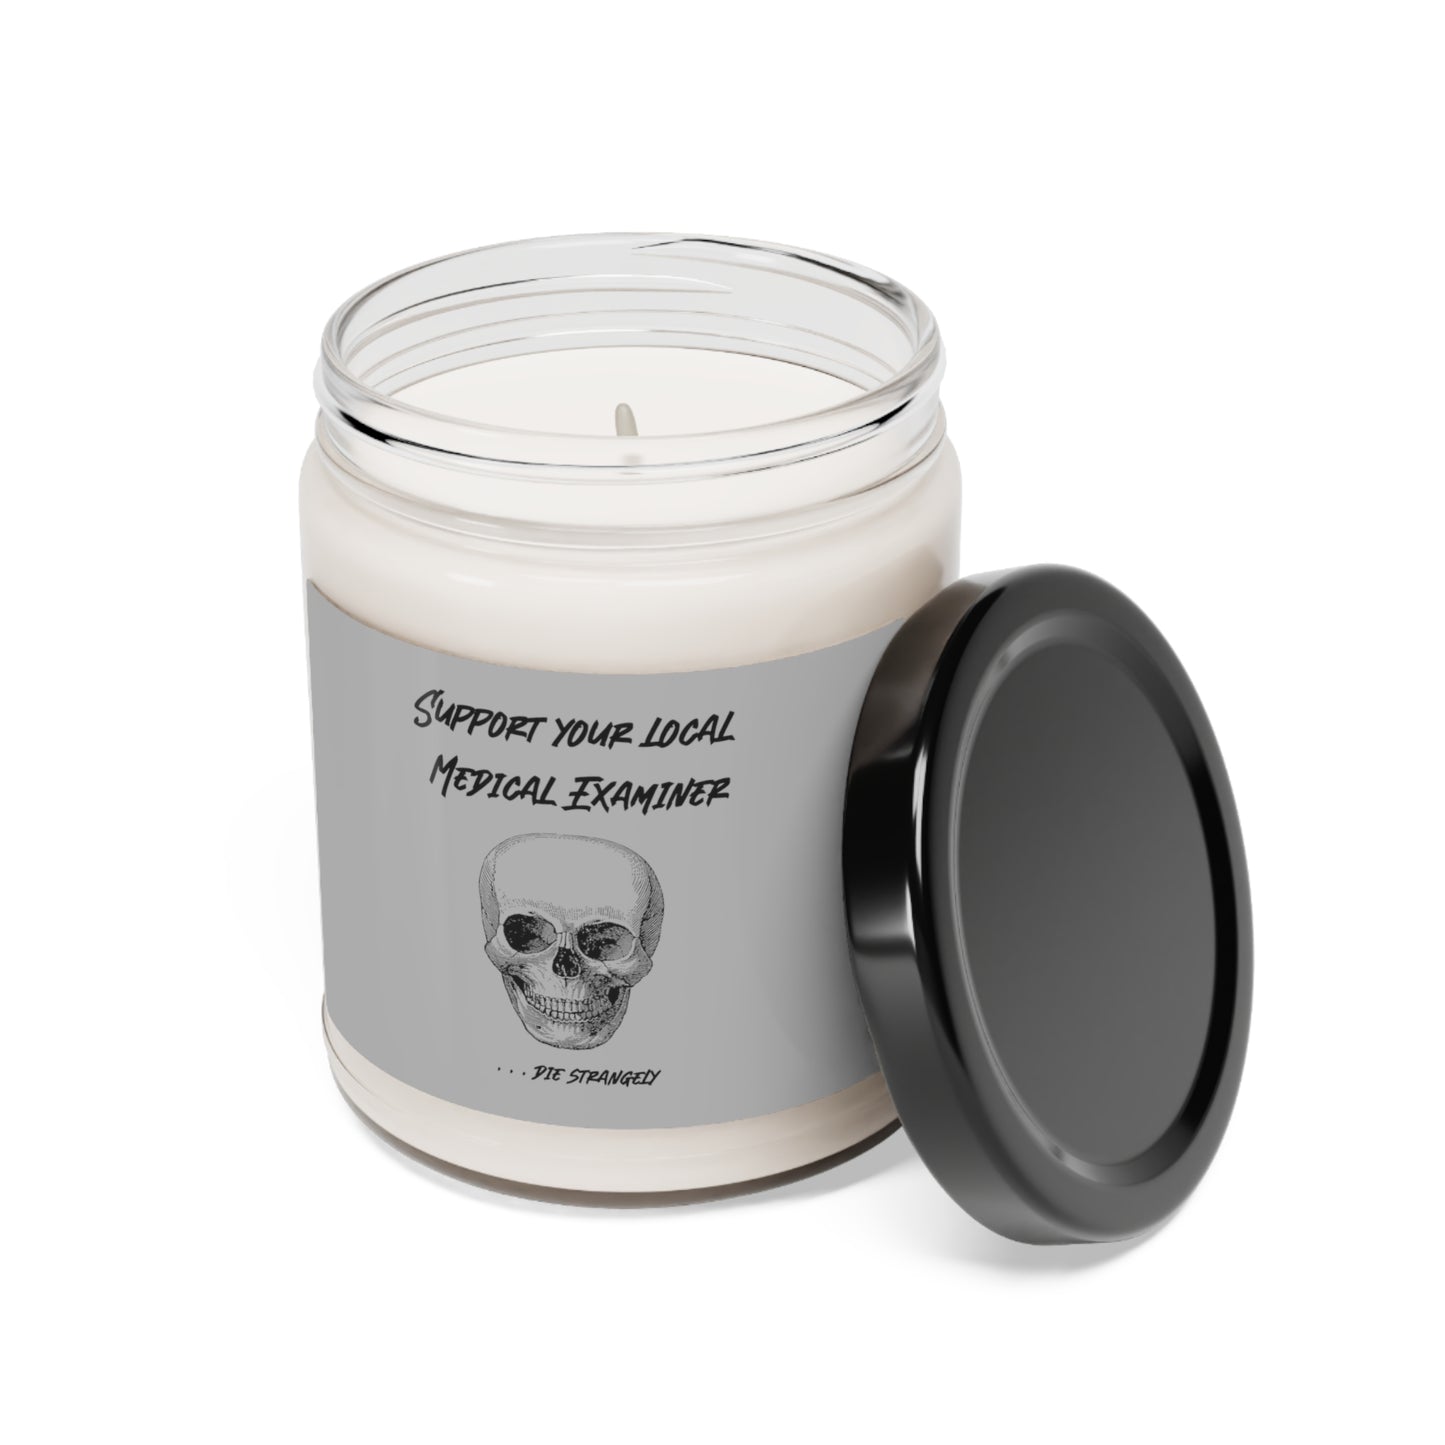 Candle - Sarcastic - Support Your Local Medical Examiner - Die Strangely - Soy Candle, 9oz